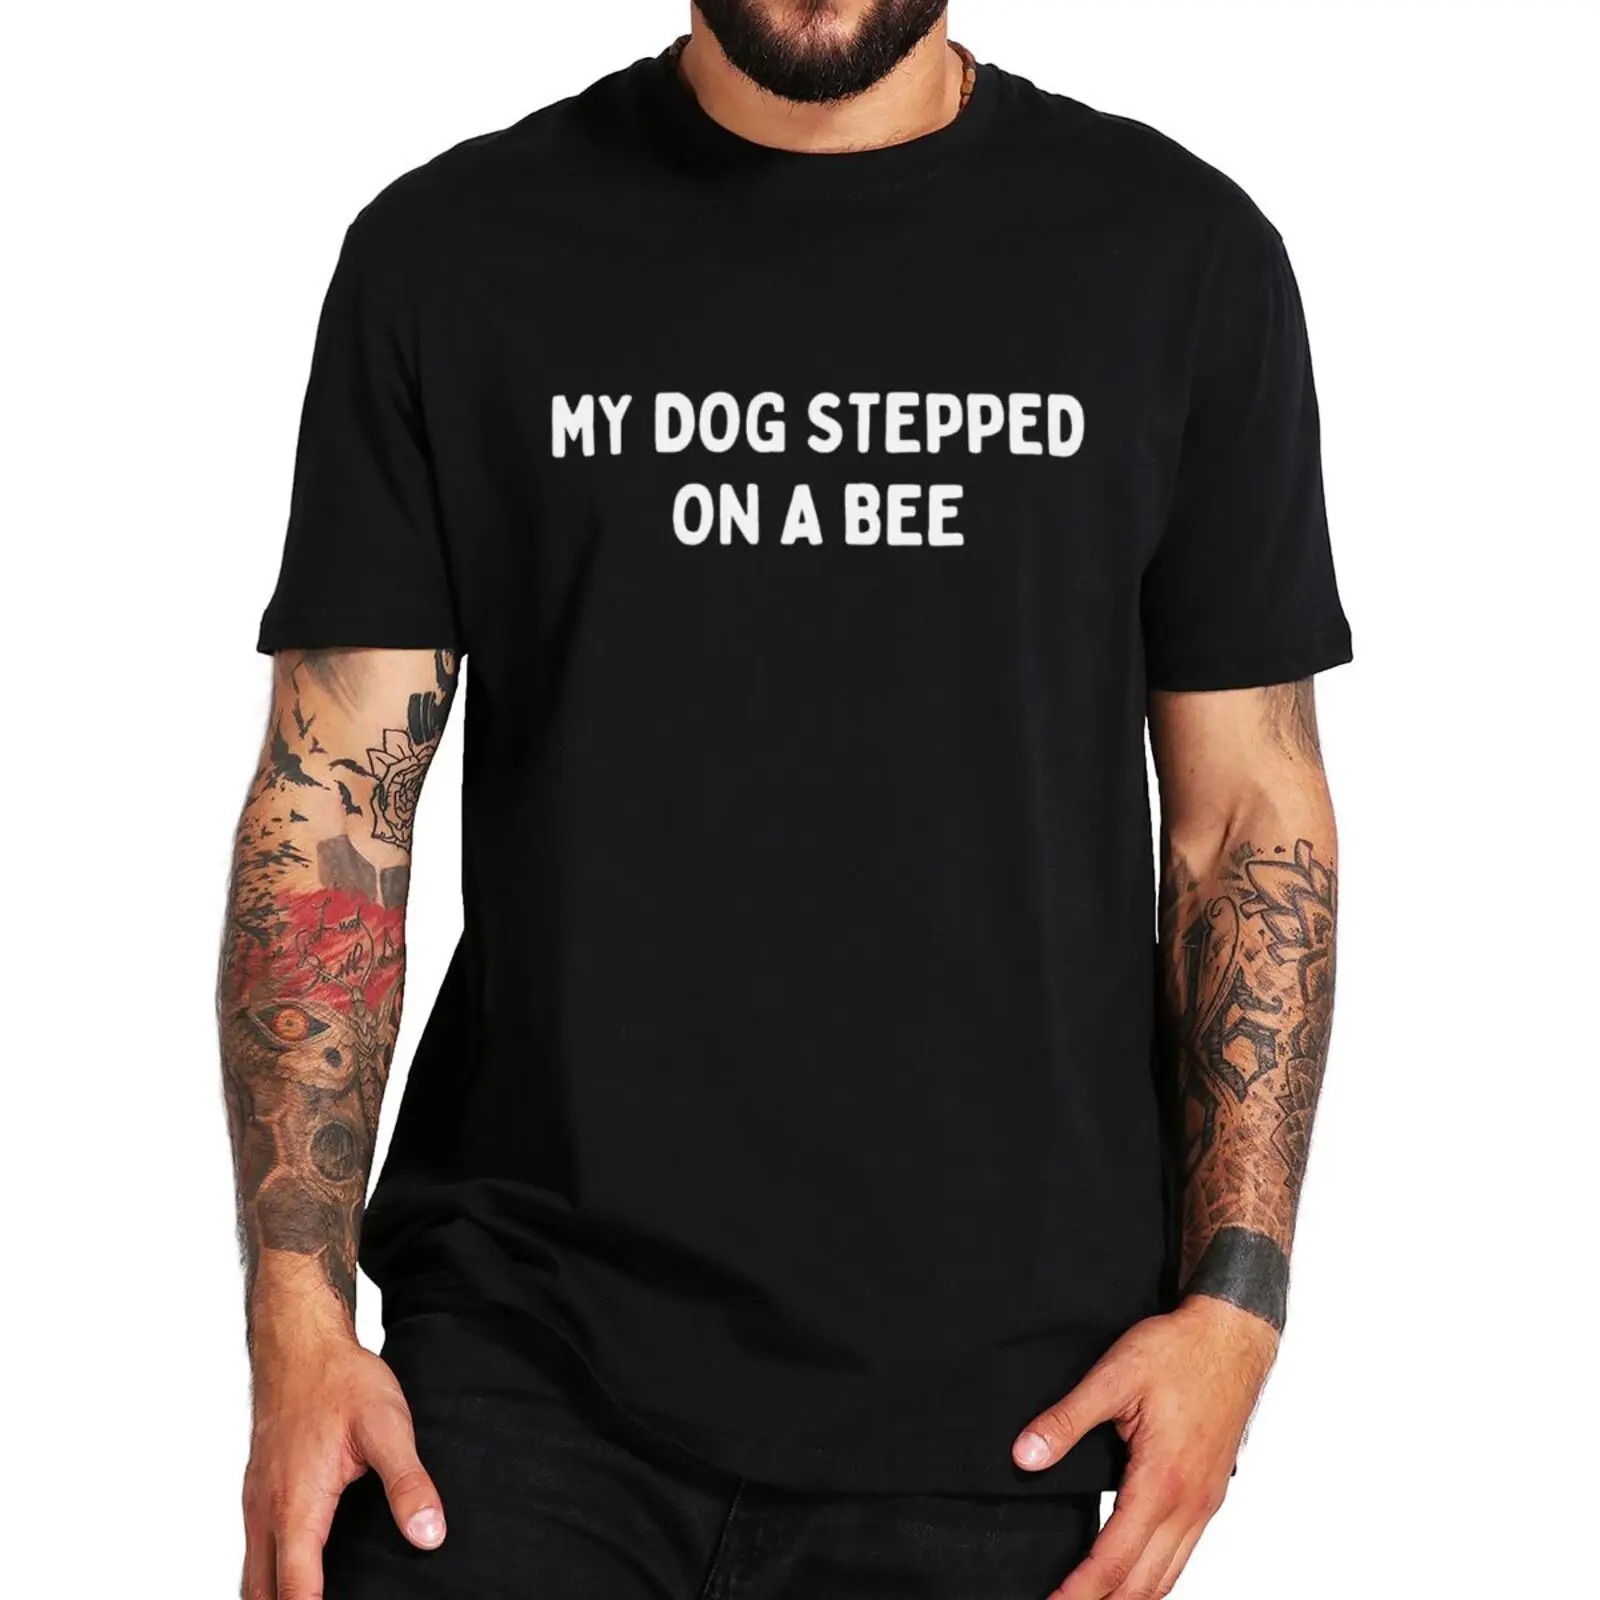 My Dog Stepped On A Bee Tshirt Funny Sarcastic Meme Casual Basic T Shirt For Men Women 100% Cotton Oversize Tee Top